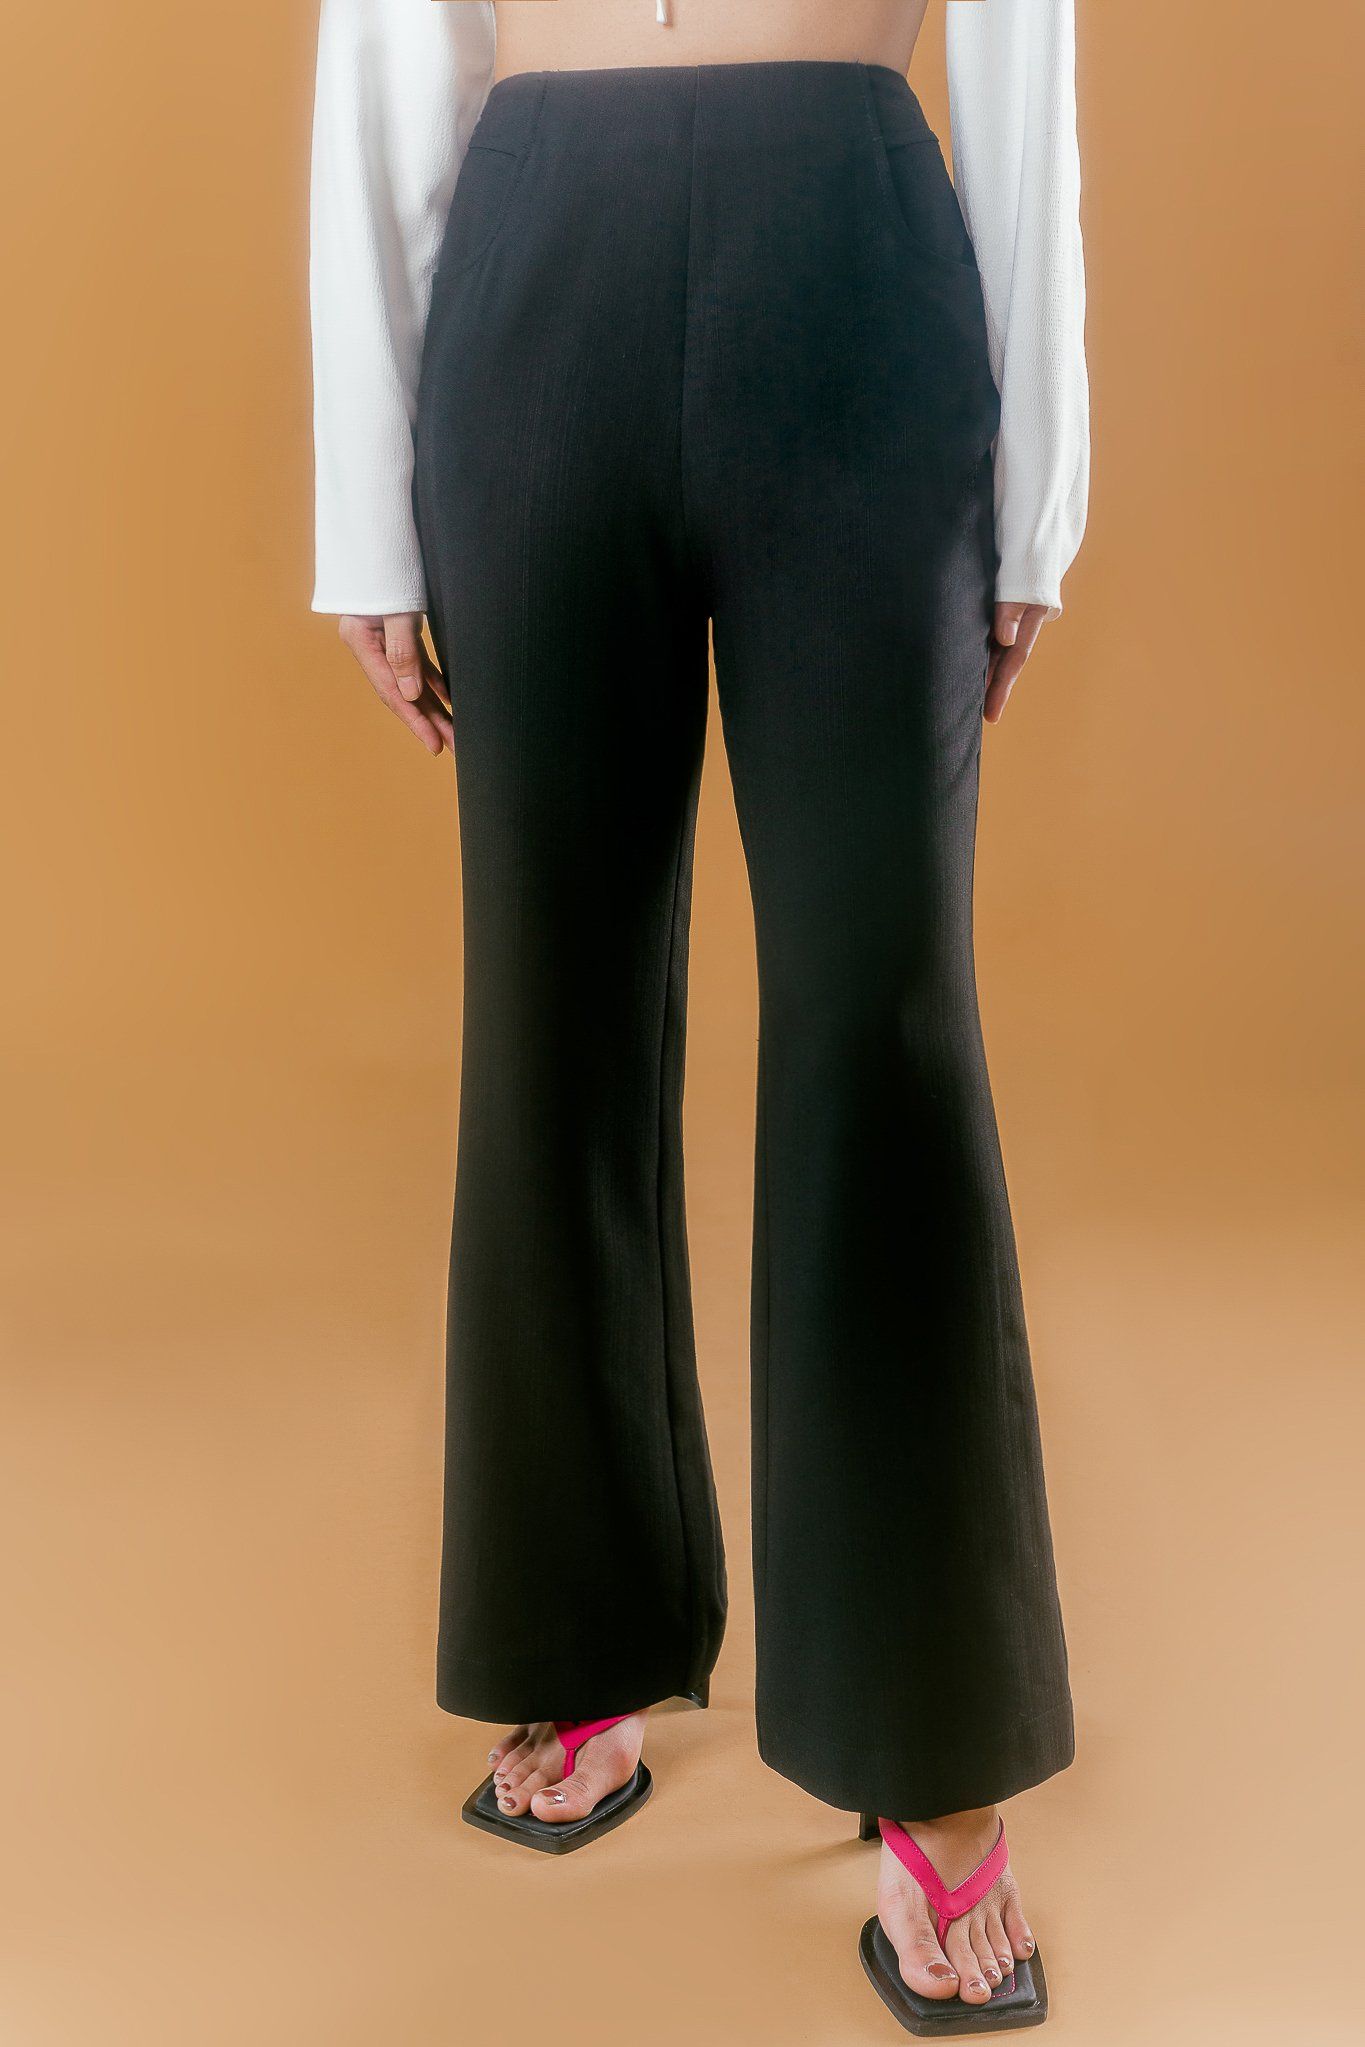 Outrageous Fortune high waist flare pants in black | ASOS